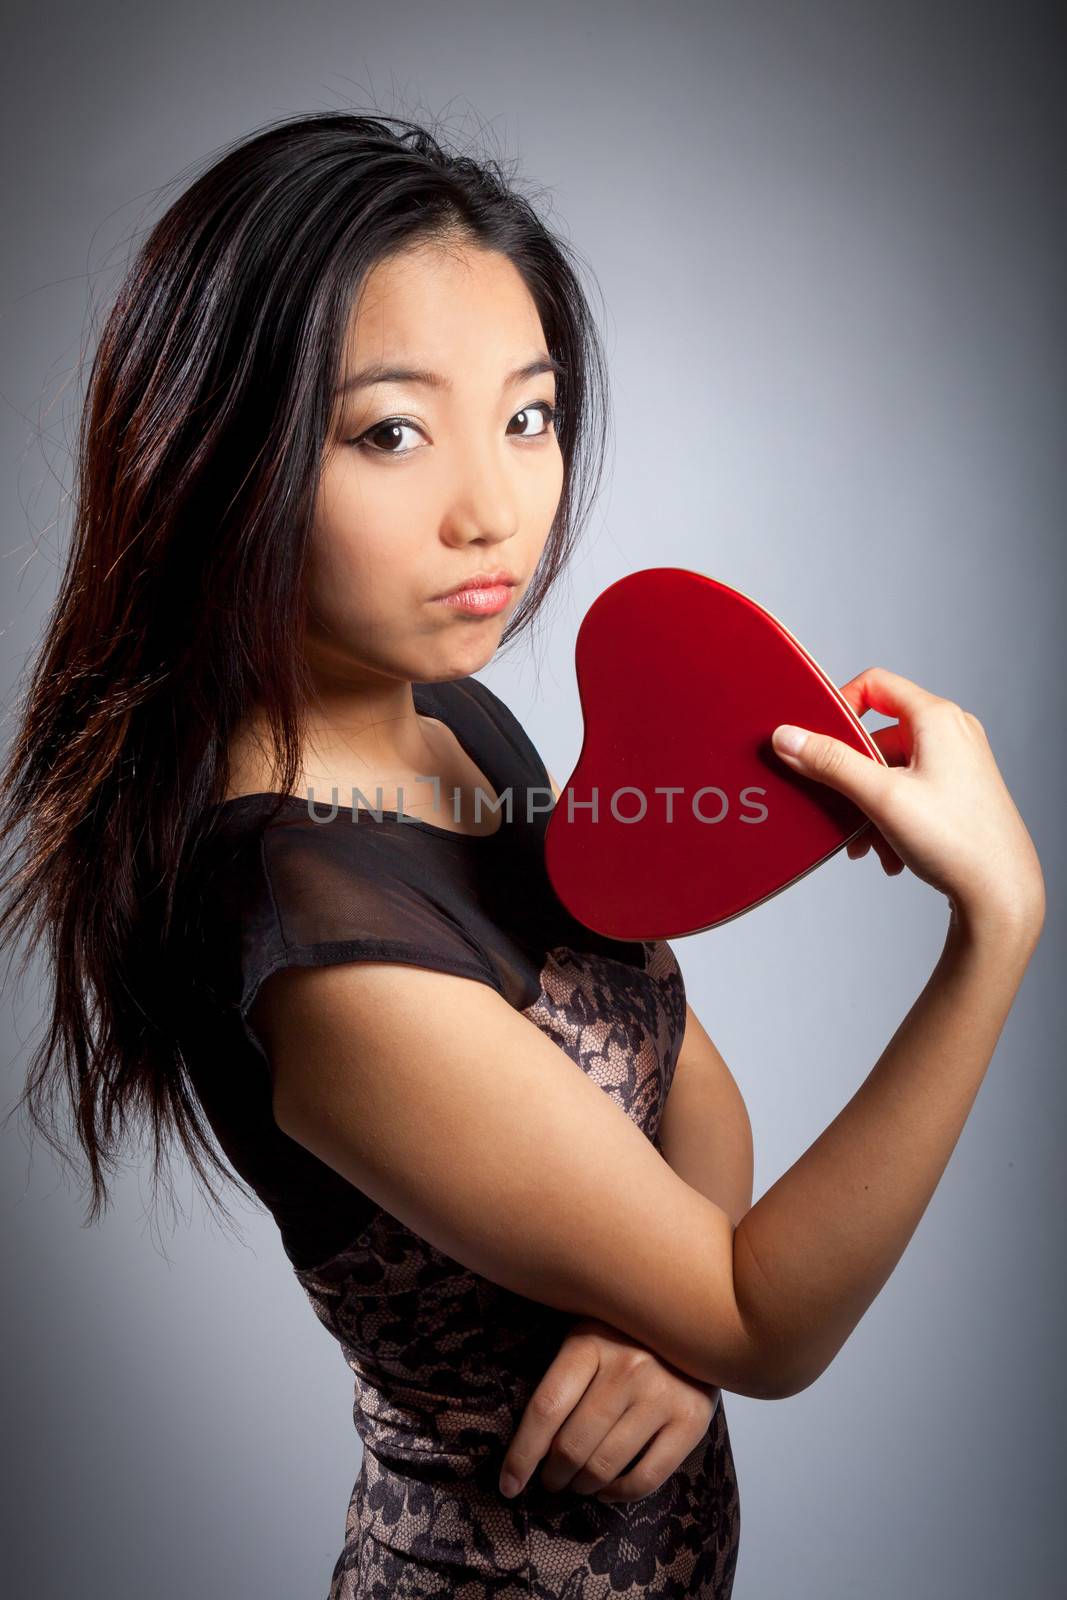 Romantic people in love shot in studio isolated on a grey background